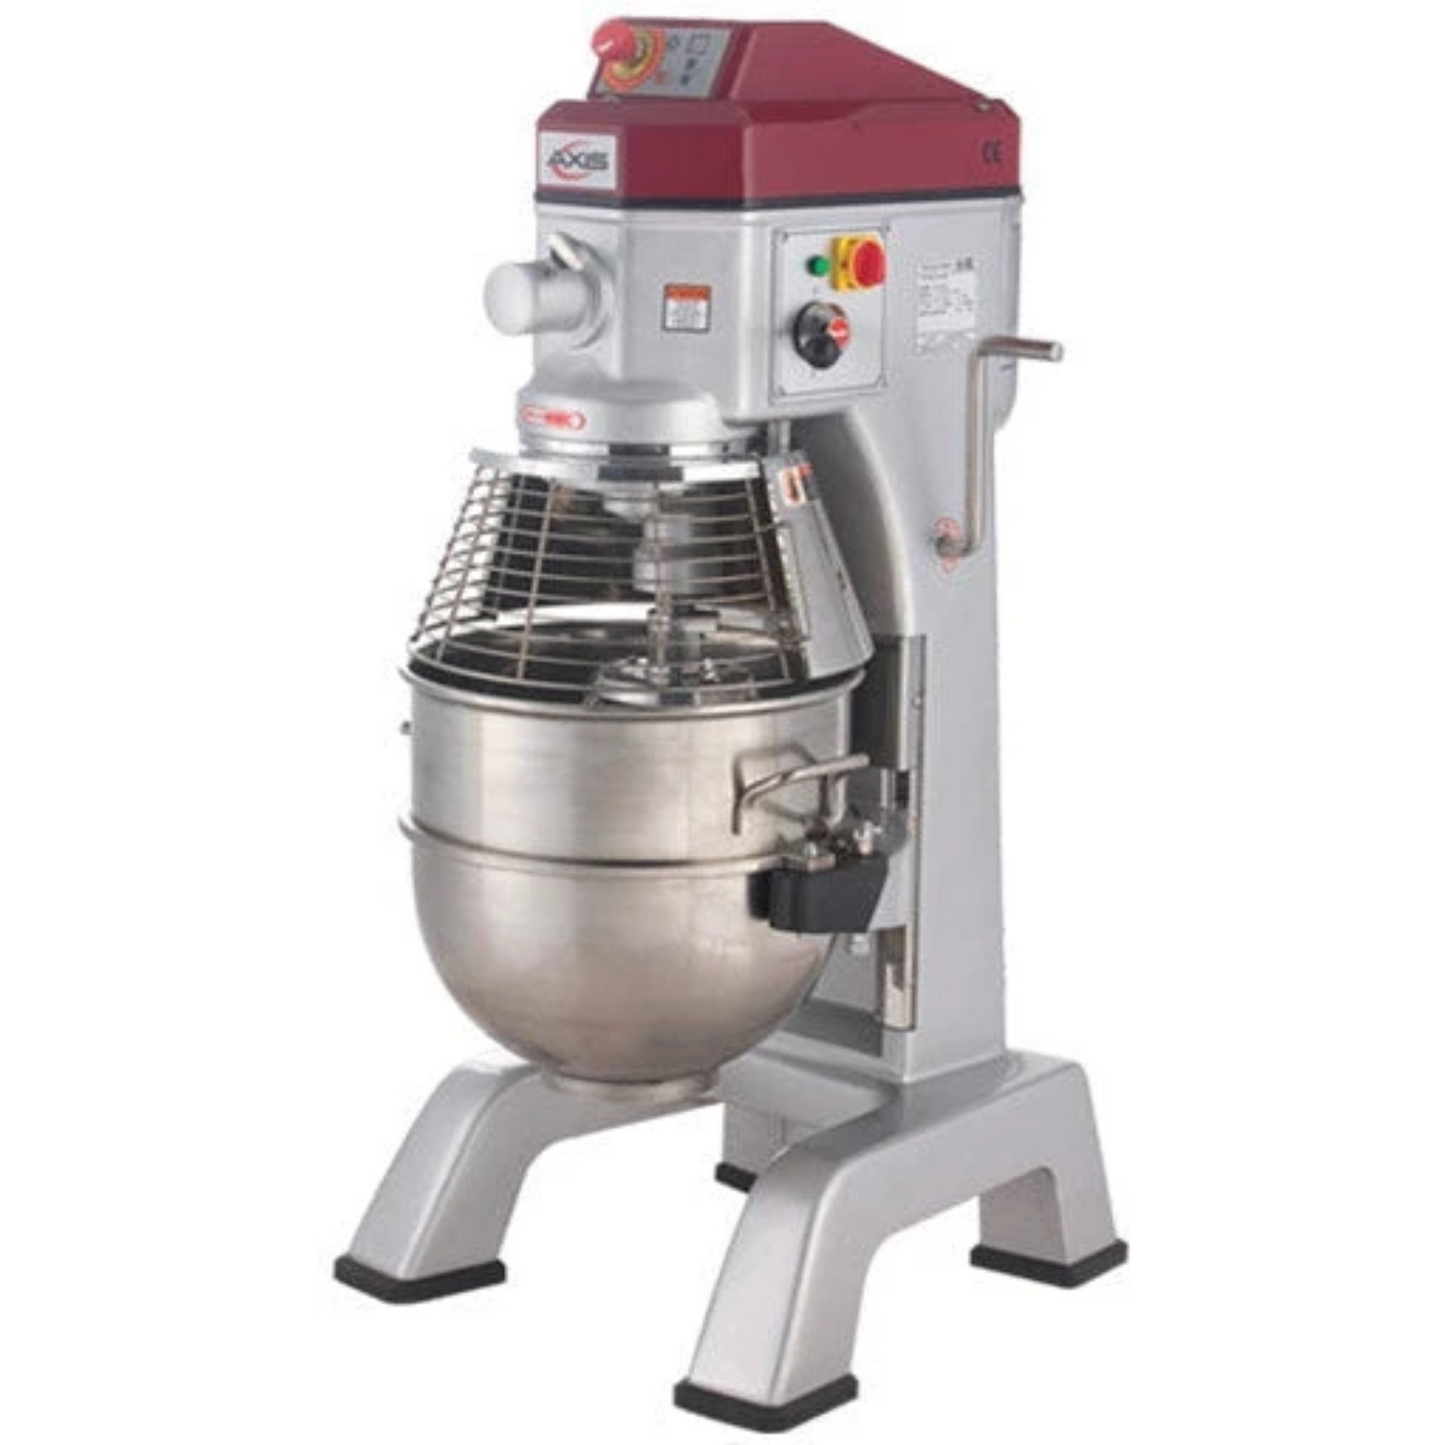 Axis AX-M40 Floor Model 40 Quart Planetary Mixer with Timer, 3-Speed, 1/2 HP